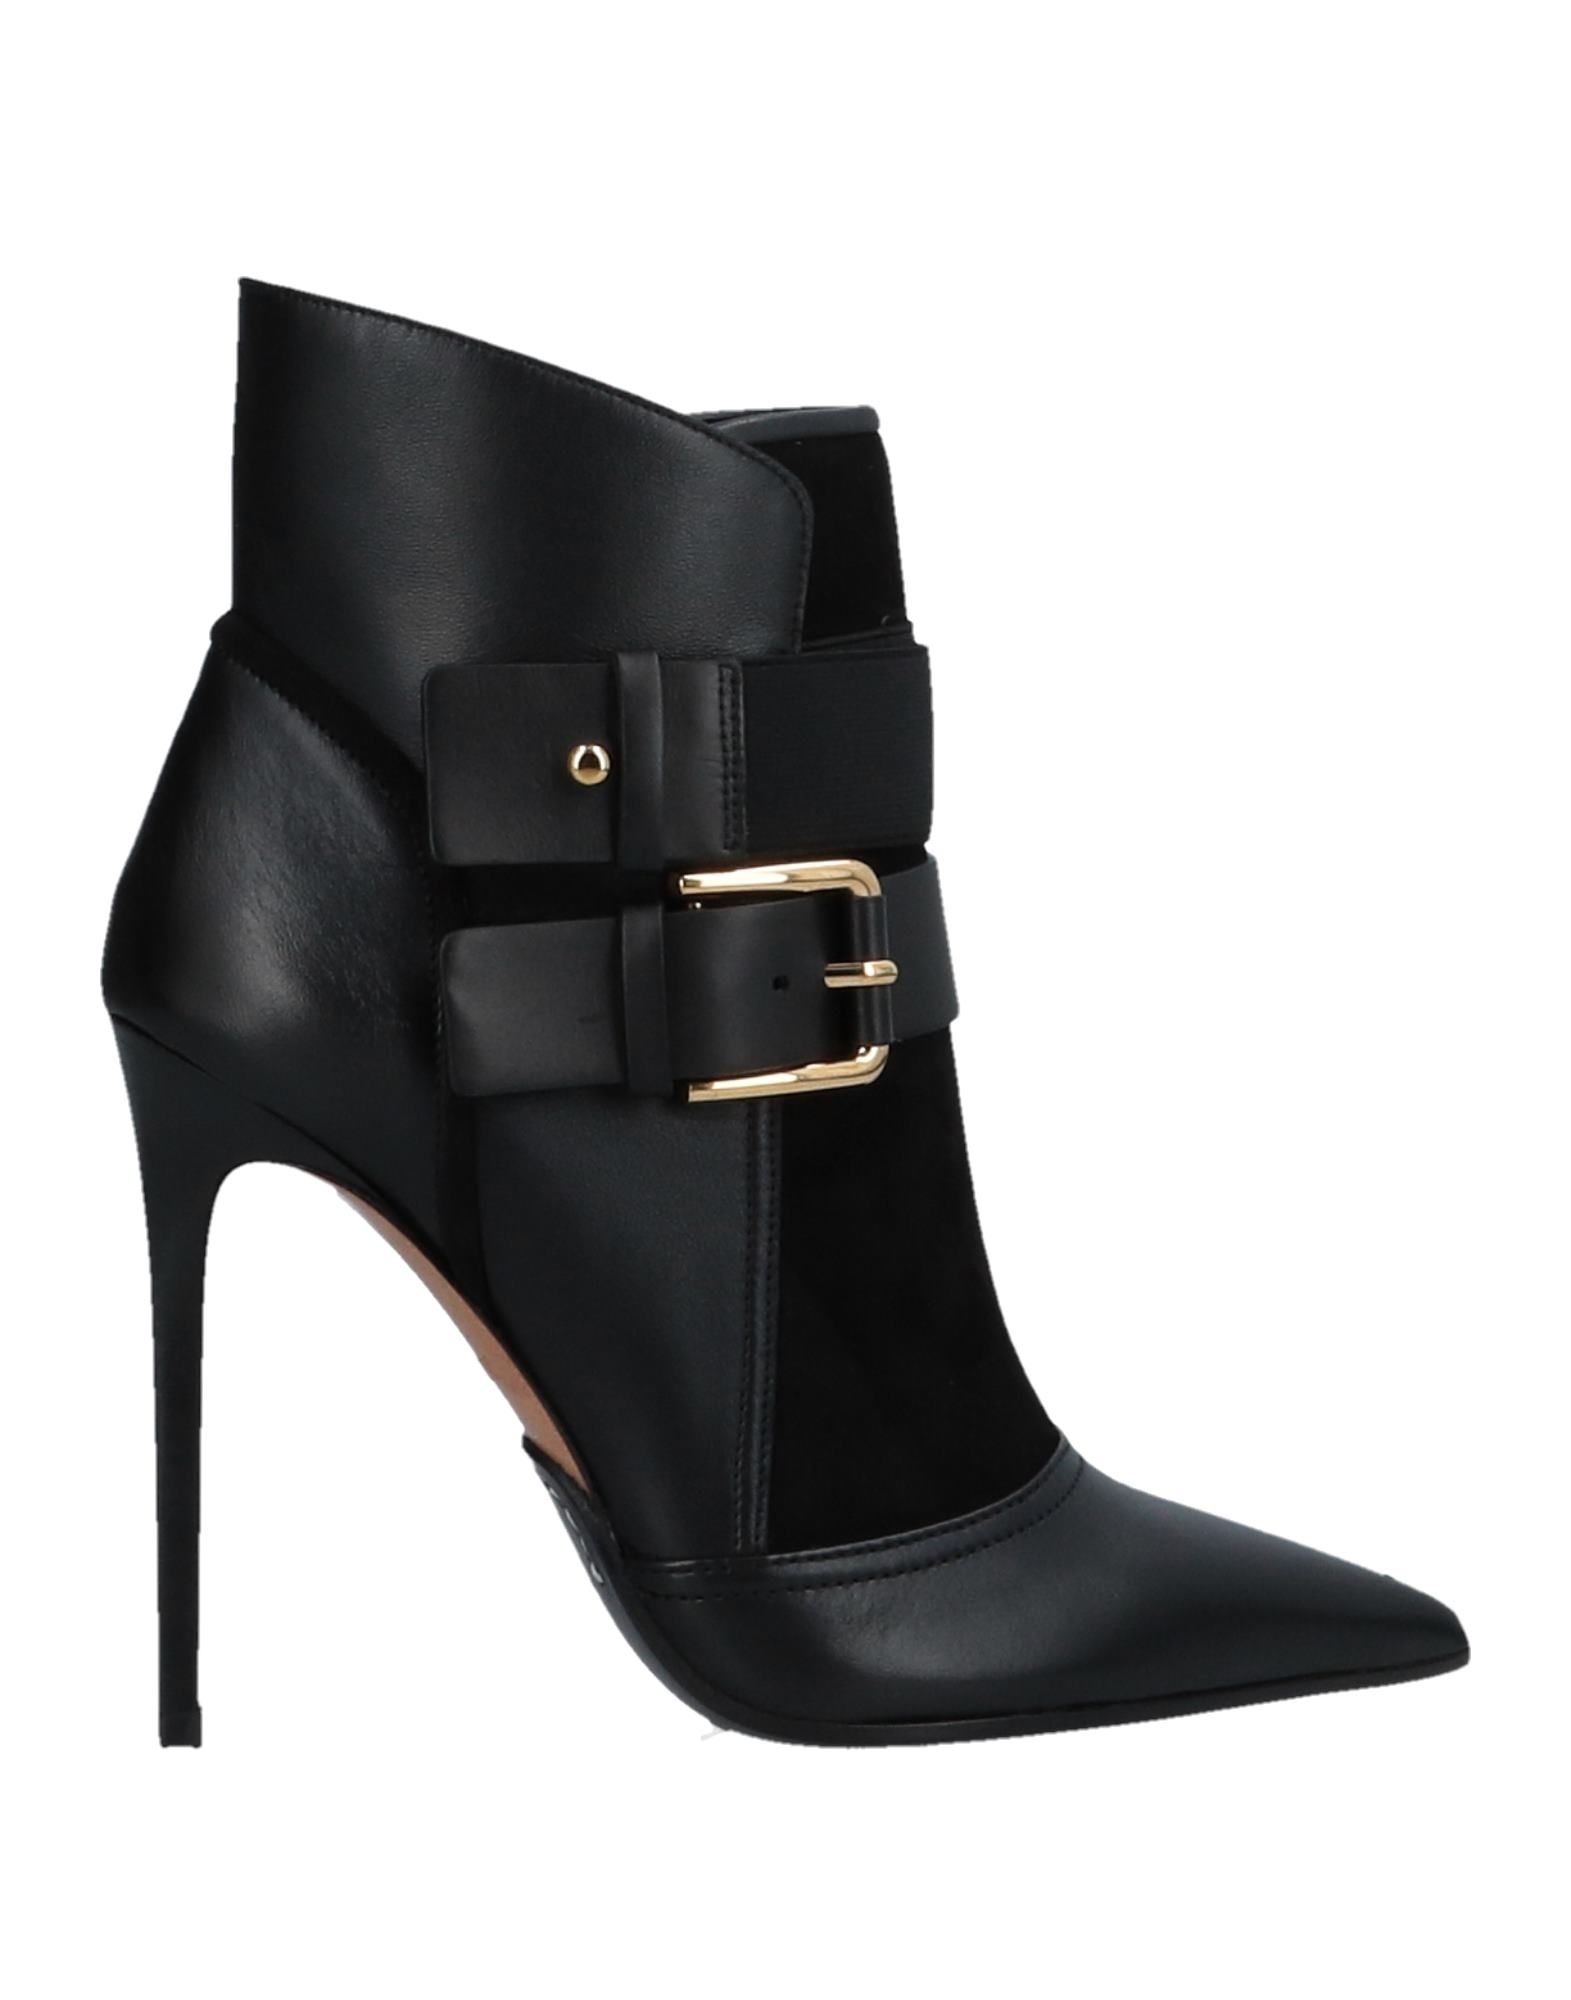 Balmain Leather Ankle Boots With Buckles And Suede In Black | ModeSens